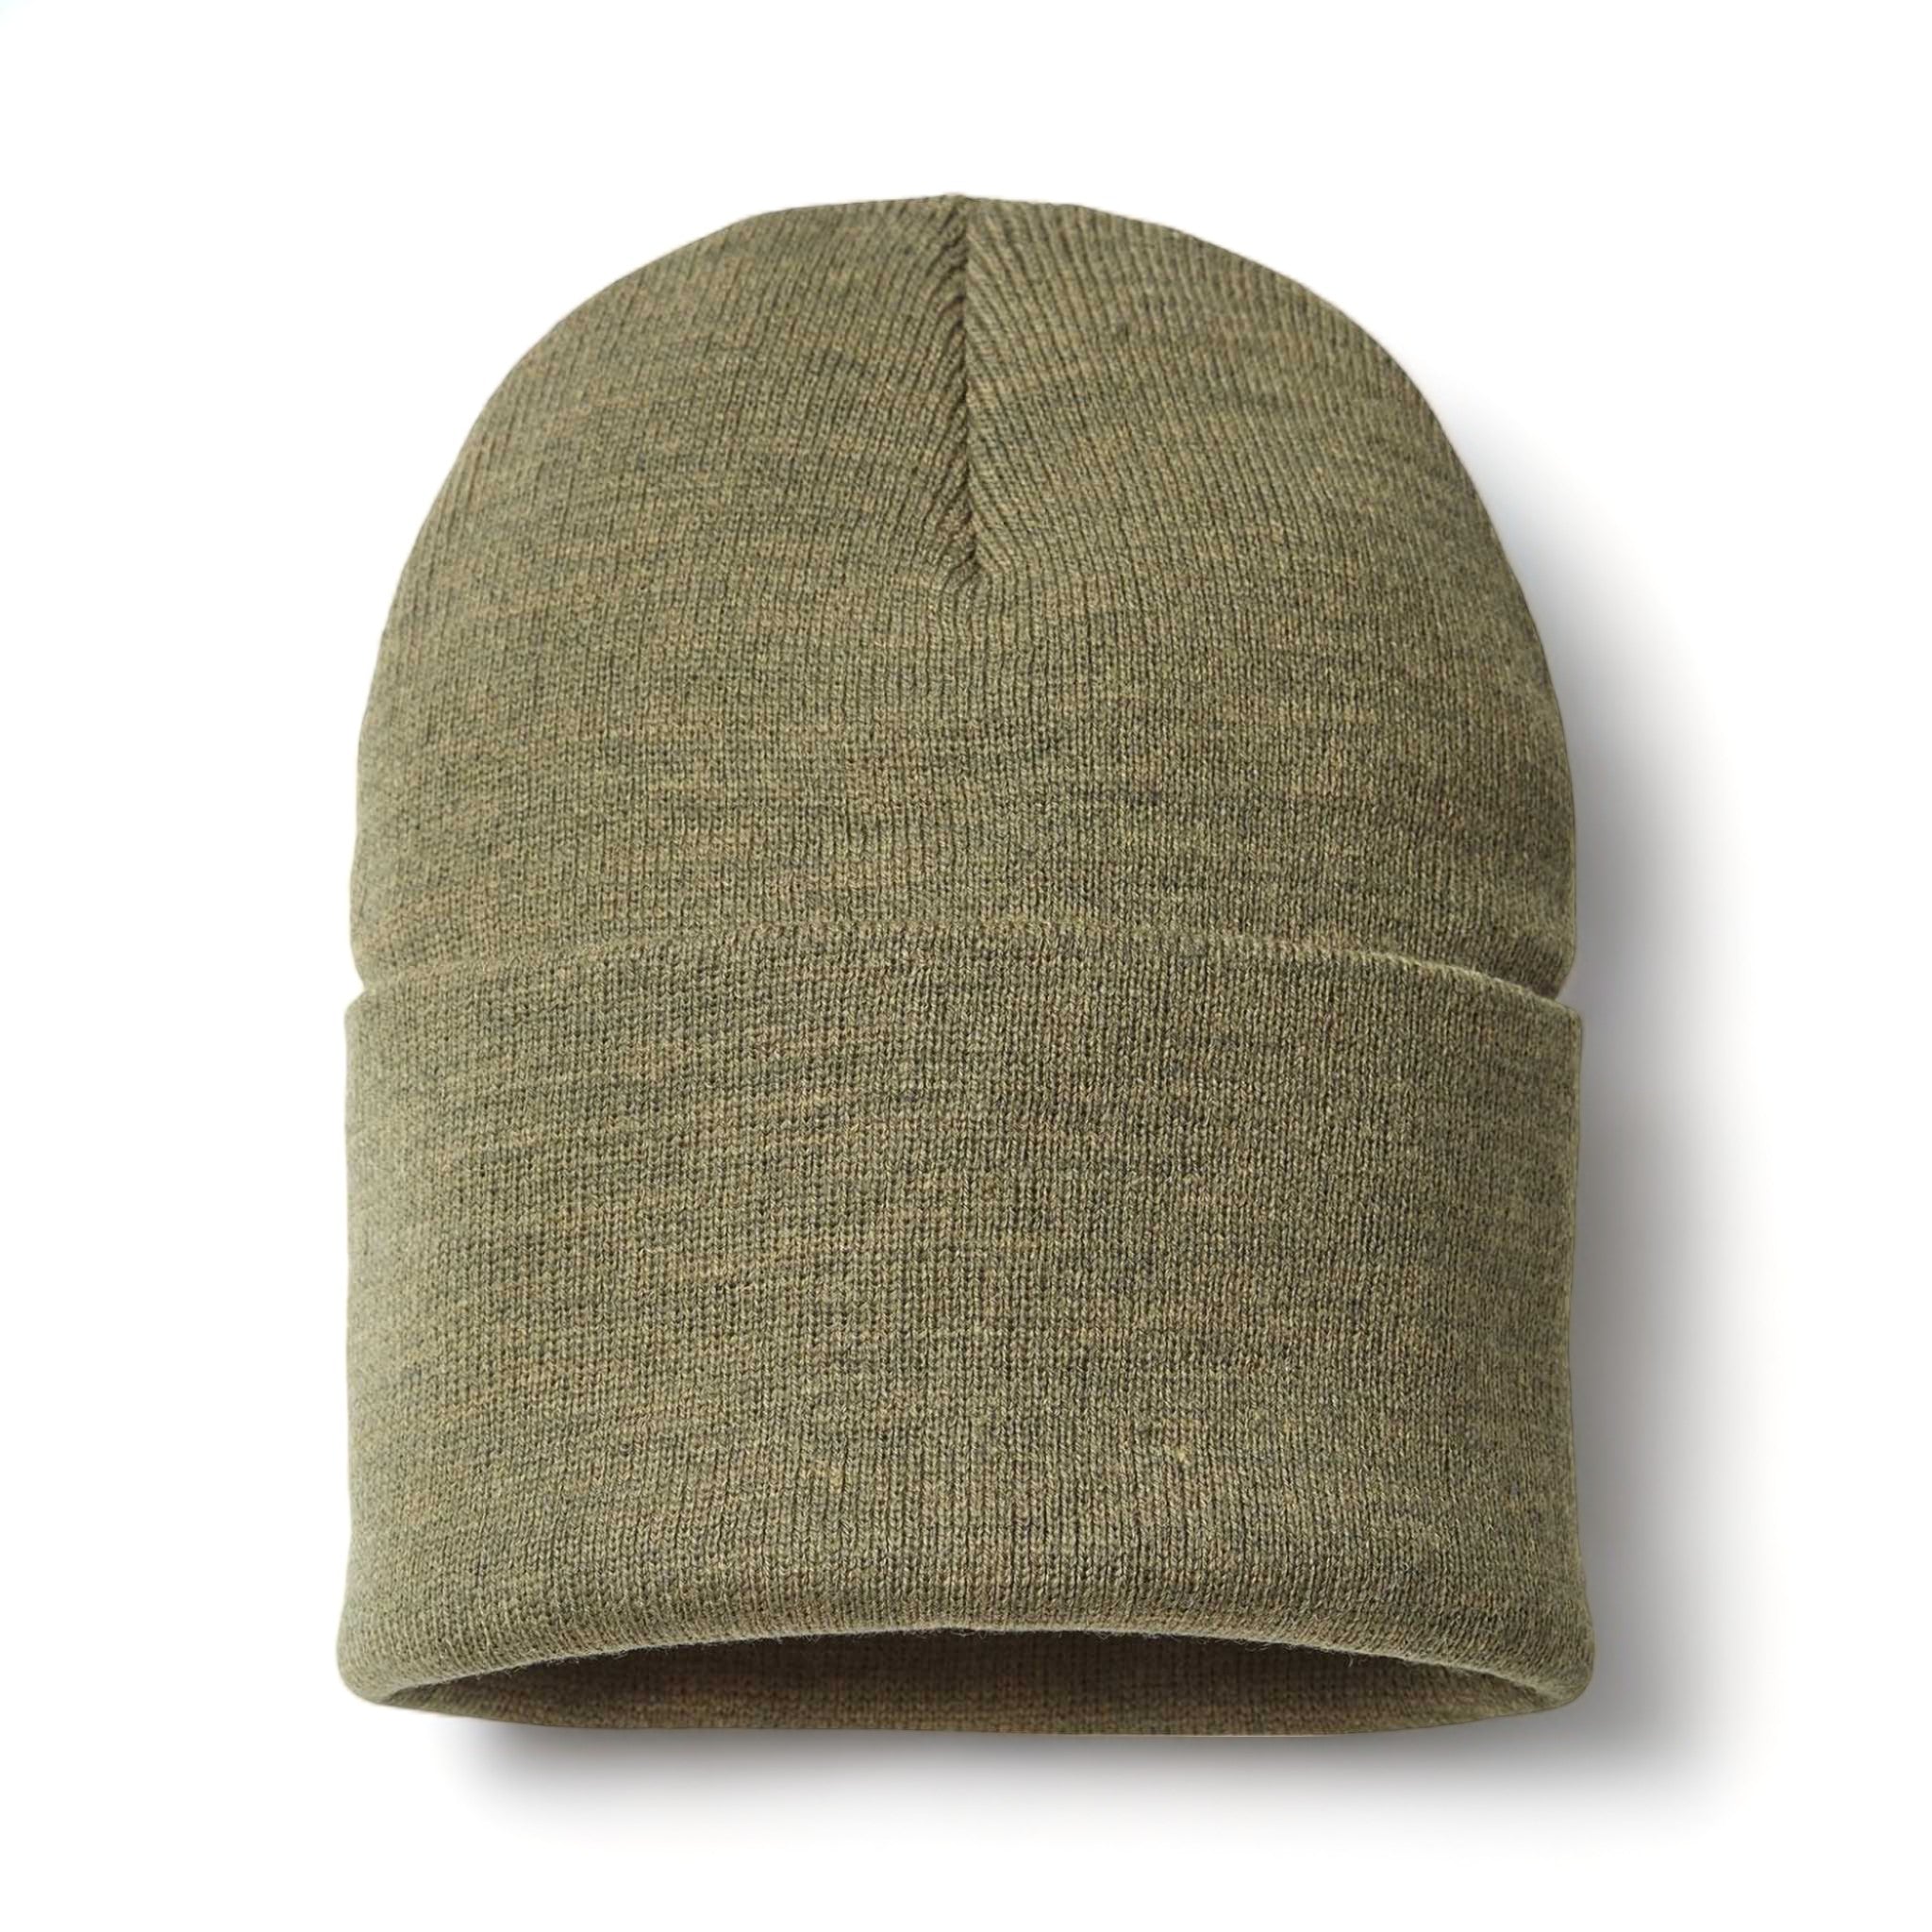 Front view of Atlantis Headwear PURE custom hat in olive